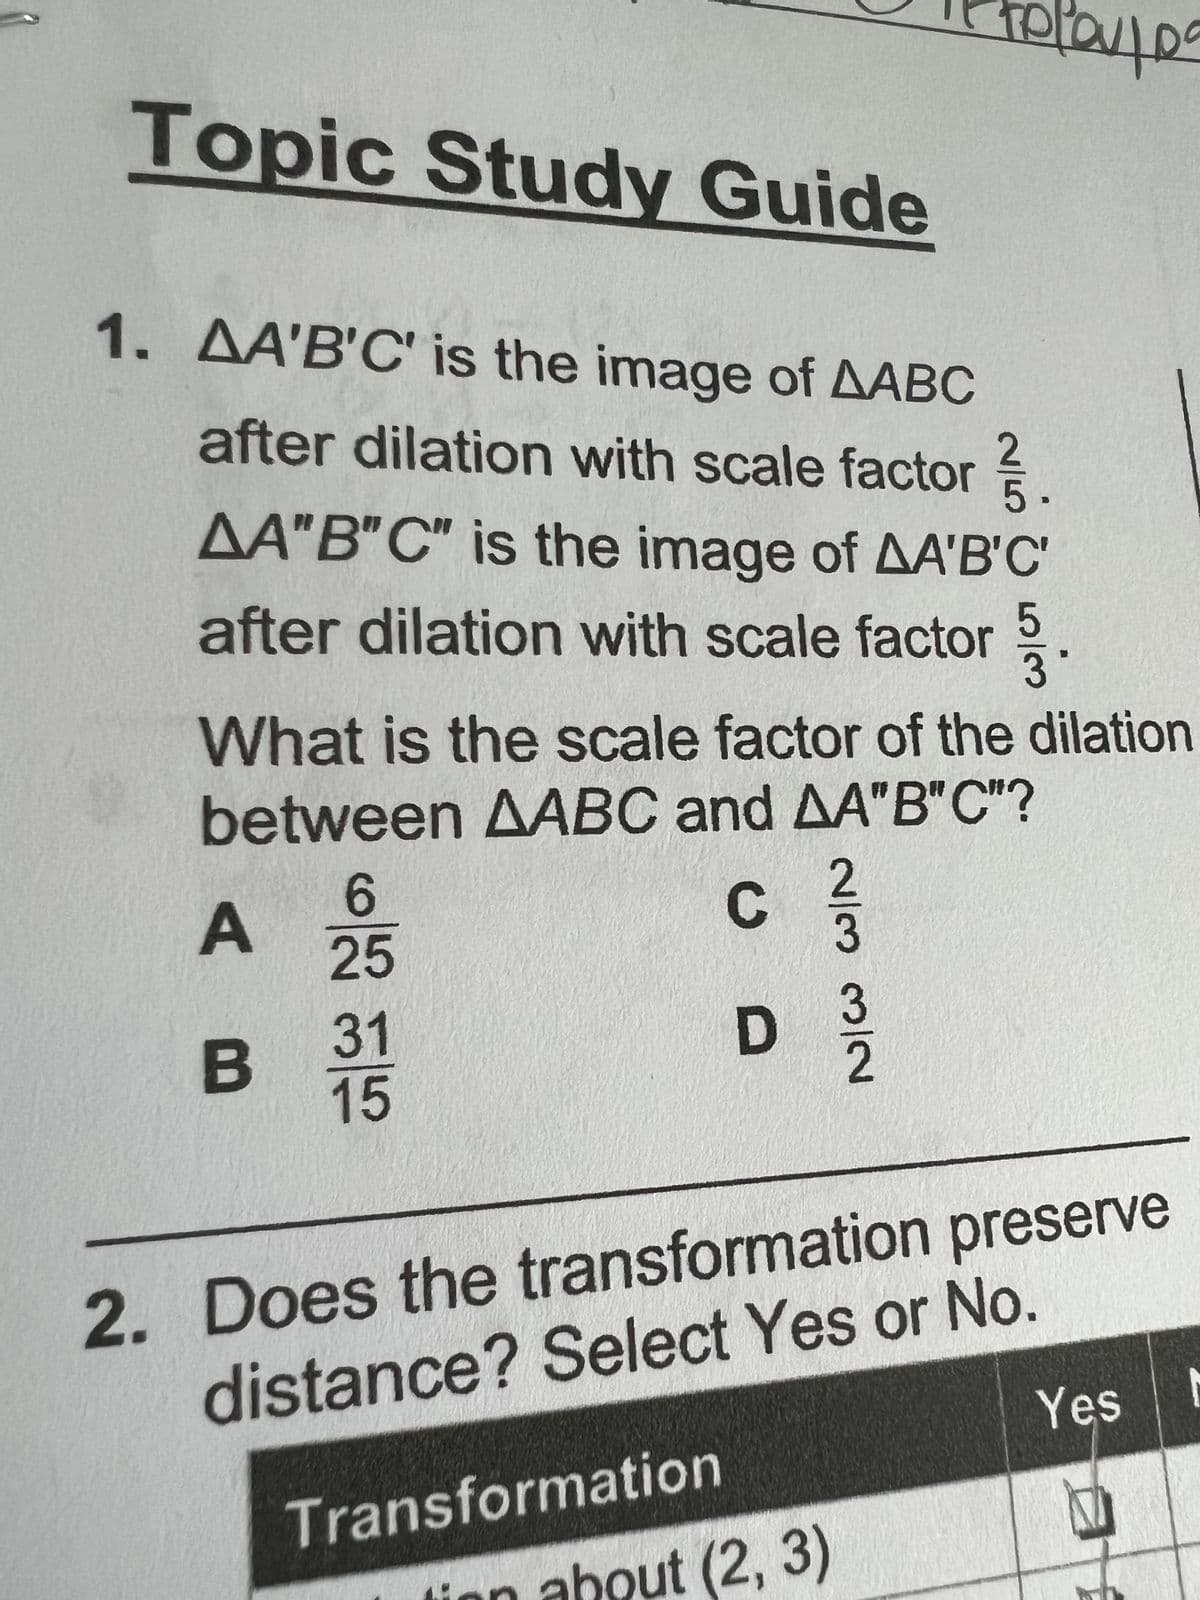 Topic Study Guide
1. AA'B'C' is the image of AABC
after dilation with scale factor
AA"B"C" is the image of AA'B'C'
after dilation with scale factor
A
B
What is the scale factor of the dilation
between AABC and AA"B"C"?
C
6
25
31
15
D
Transformation
2/3 3/2
co/cr
400
2. Does the transformation preserve
distance? Select Yes or No.
ut (2, 3)
Yes
M
N